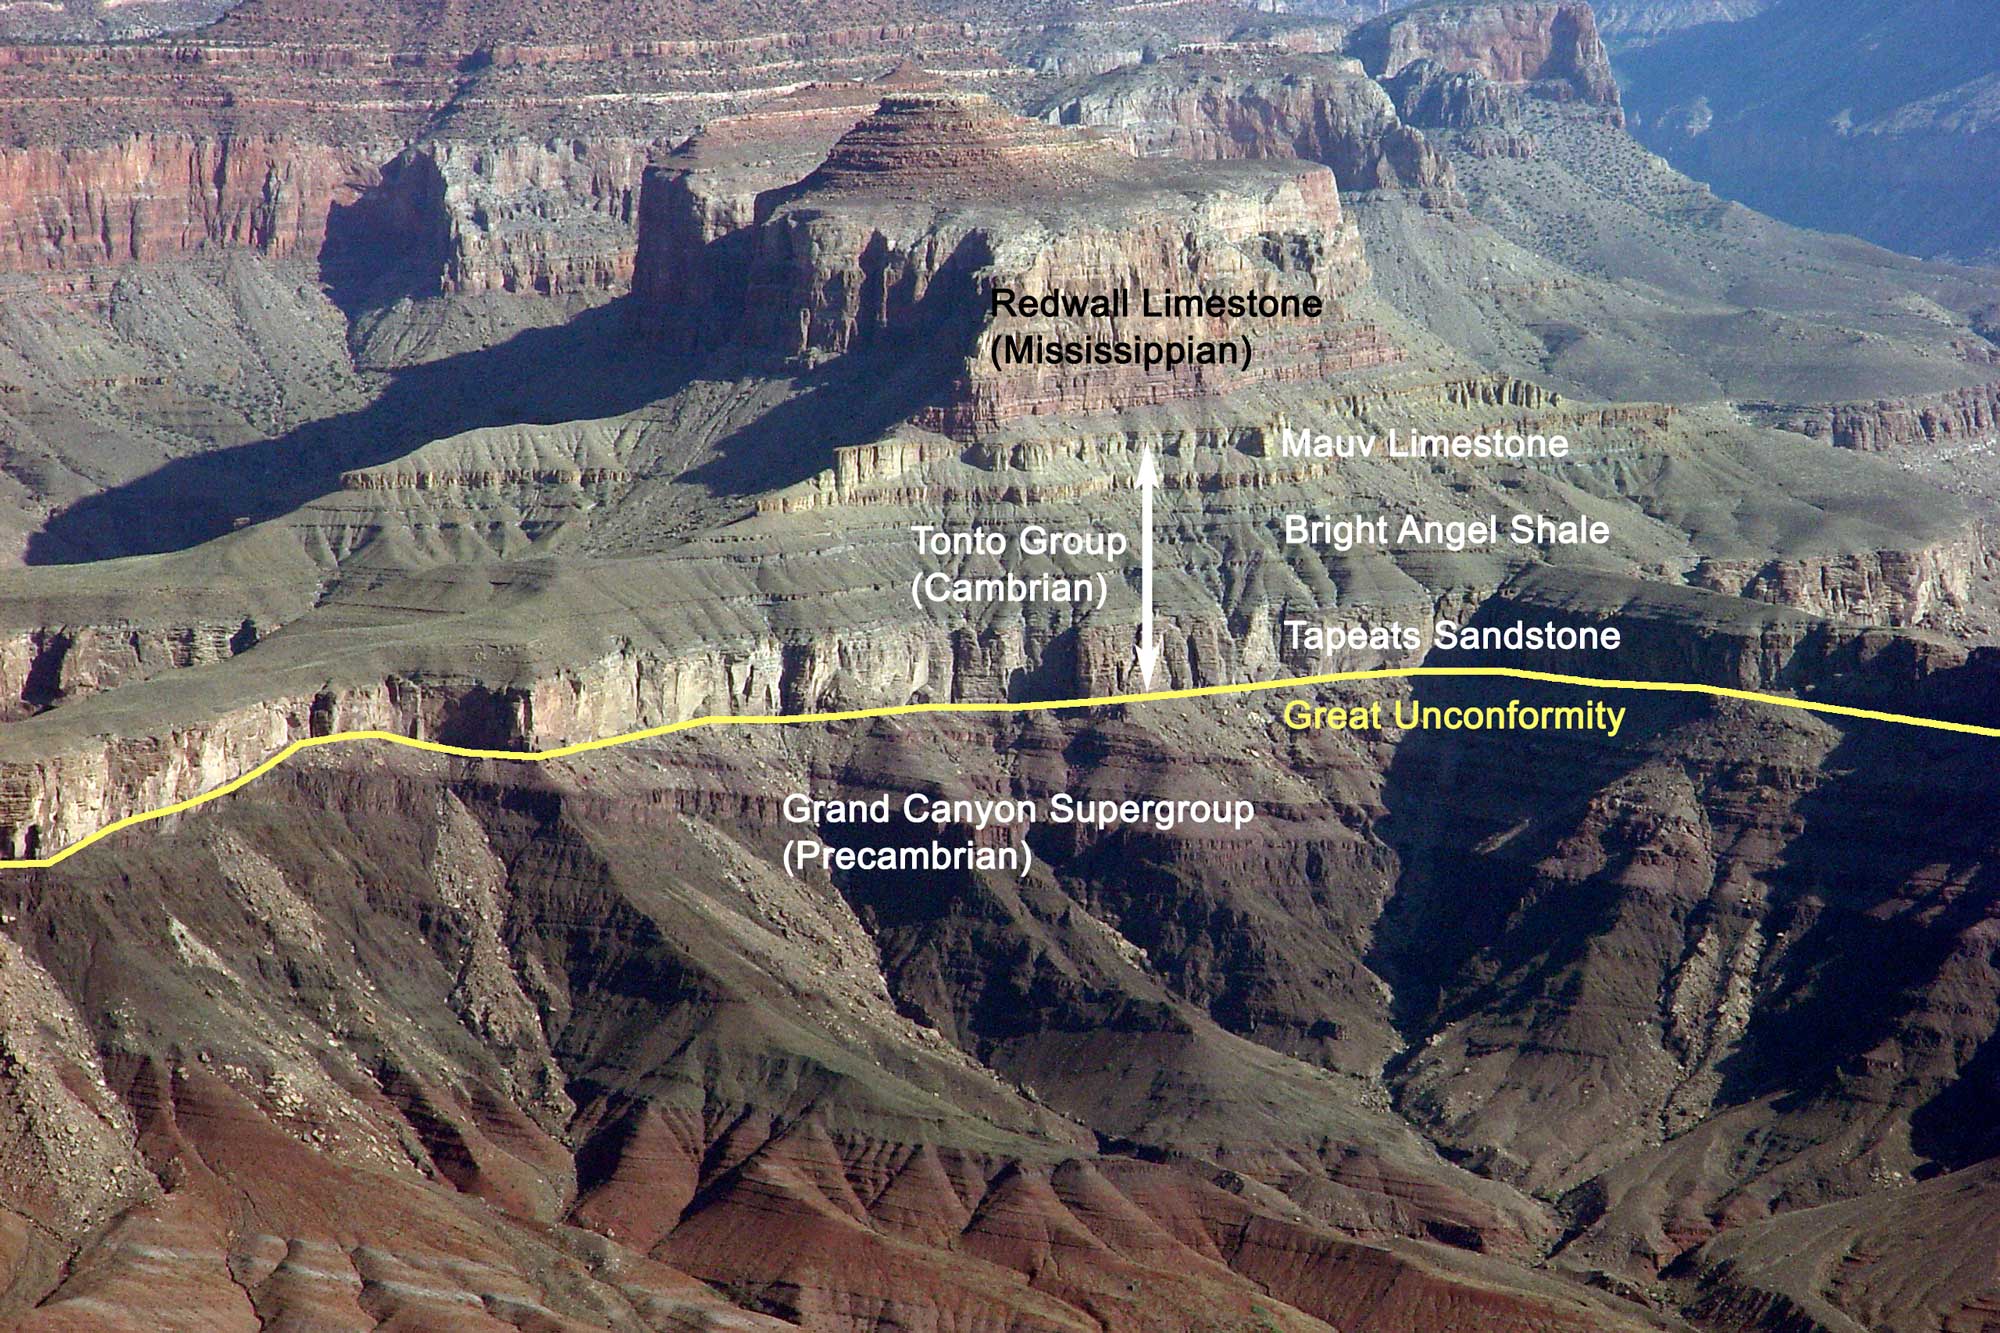 Photograph of the Grand Canyon with the Great Unconformity and stratigraphic units identified.